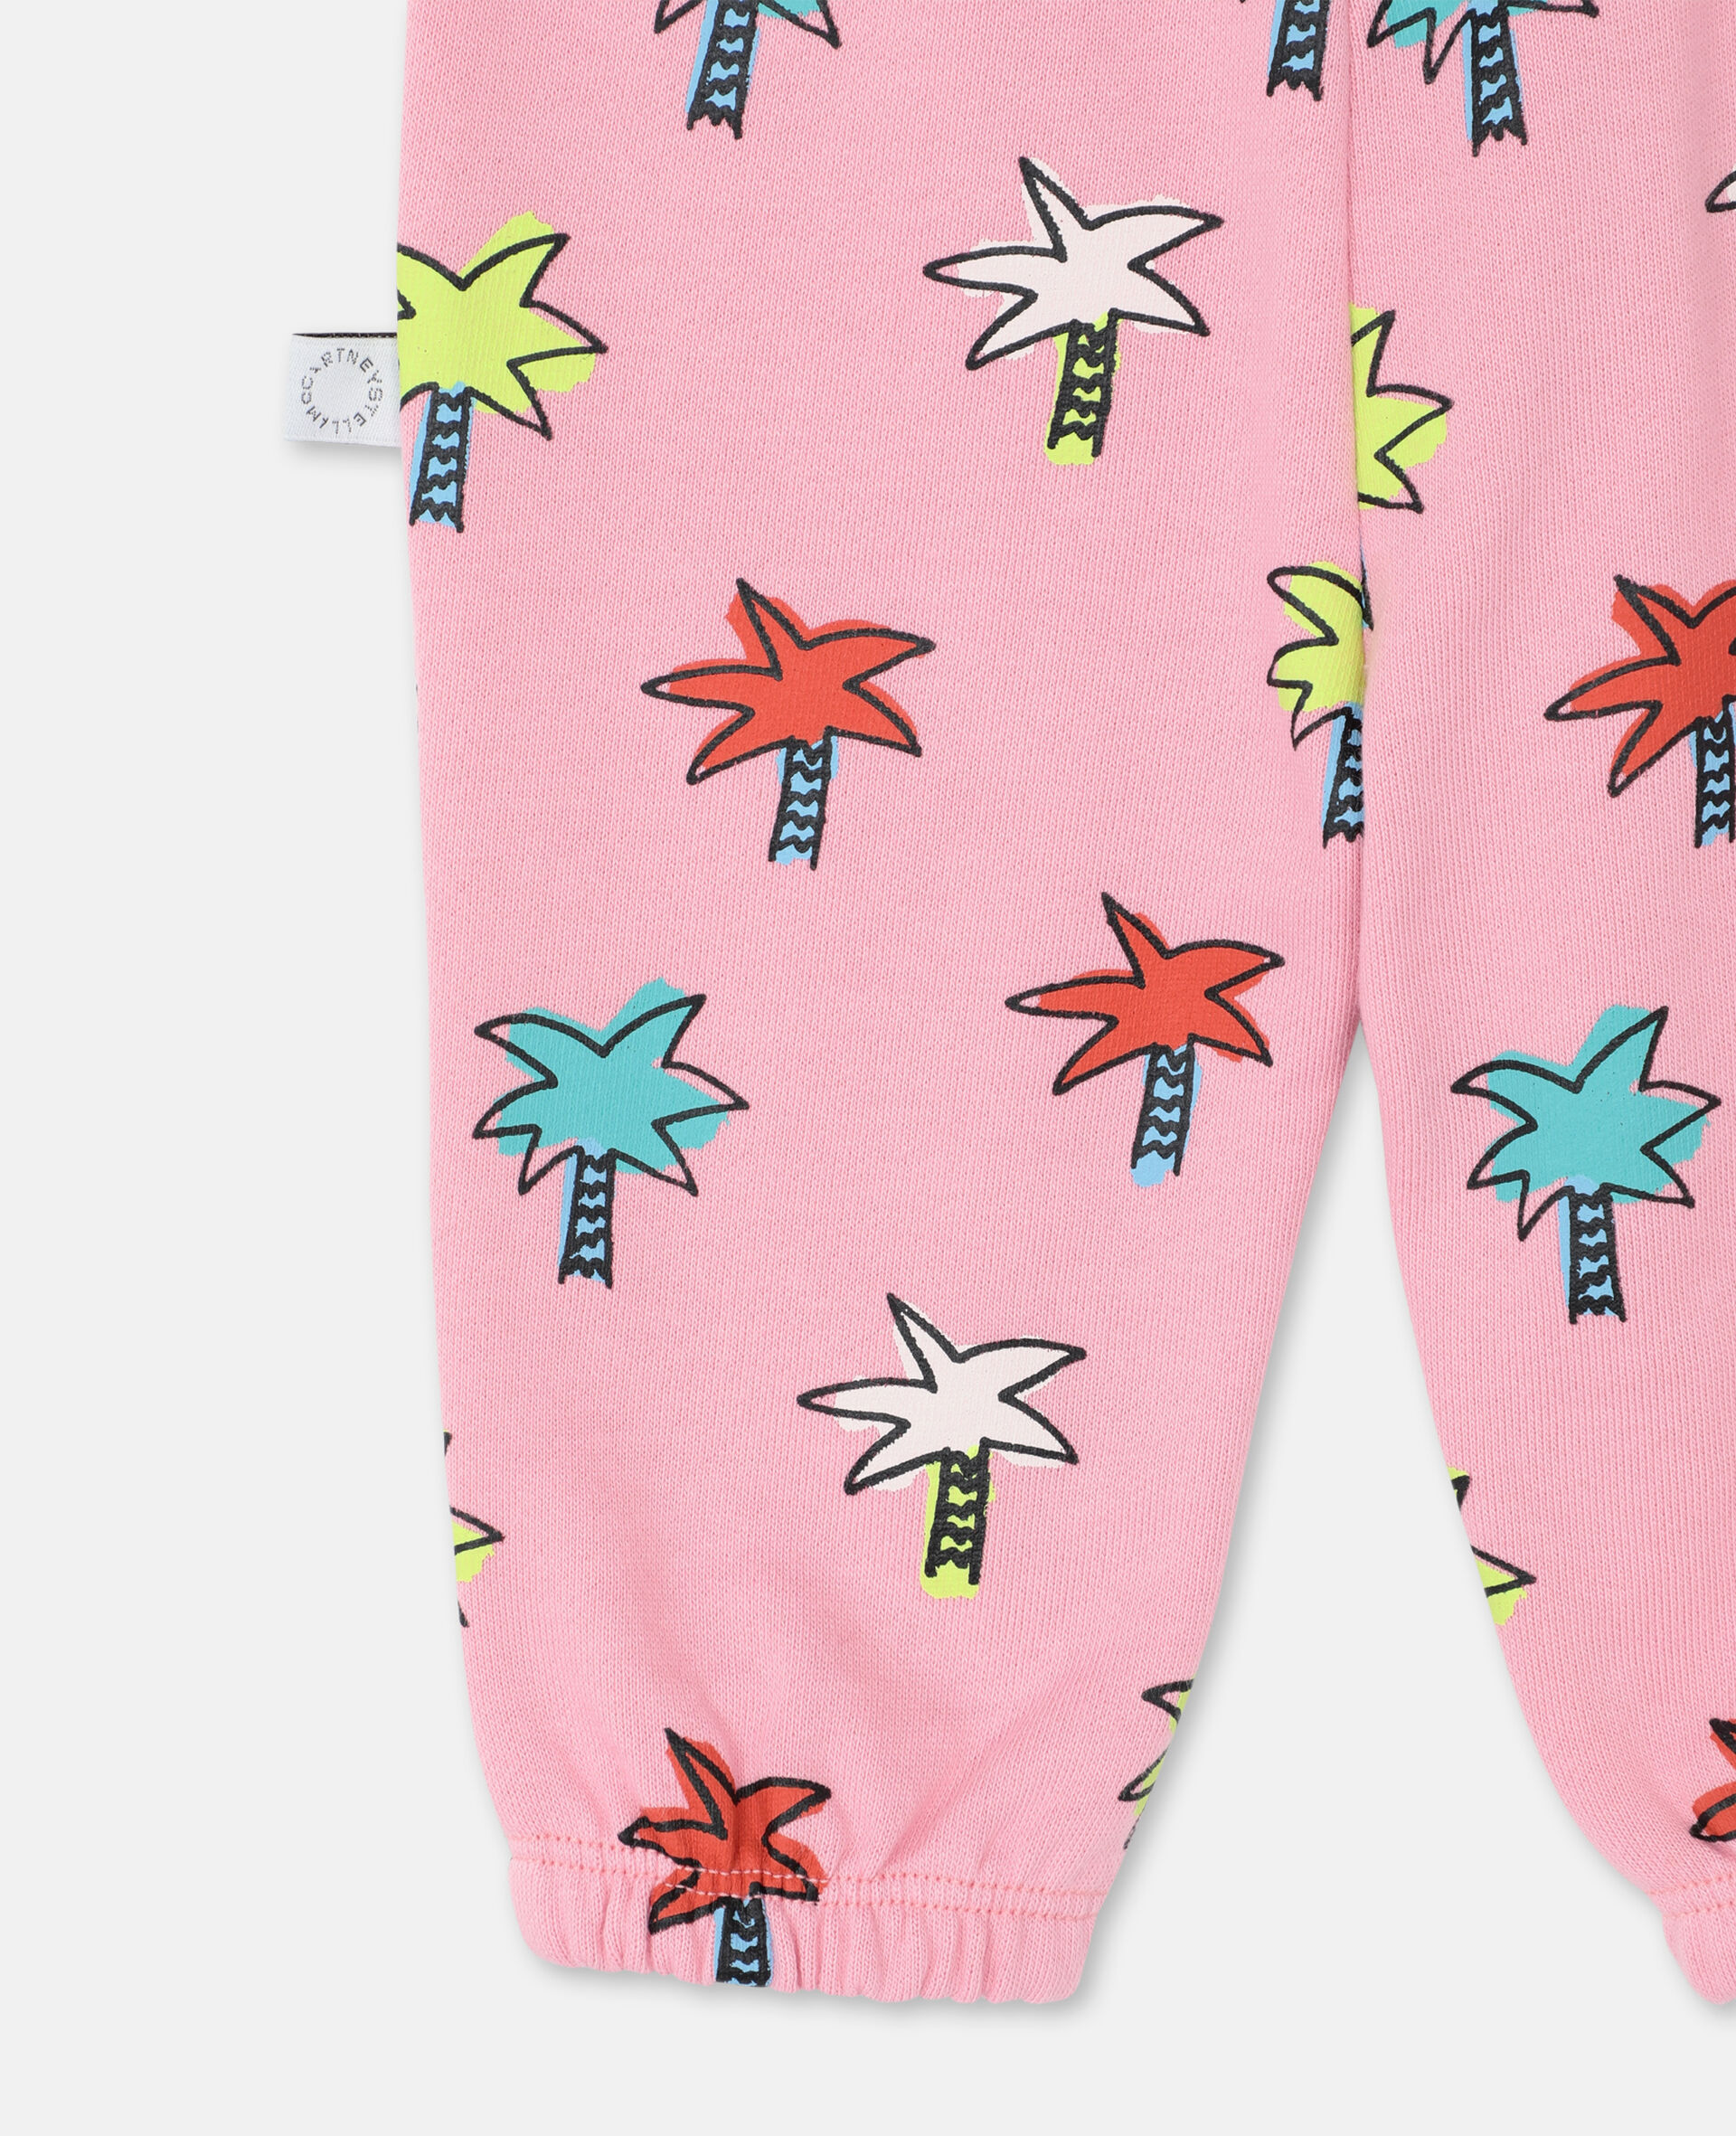 Doodly Palms Cotton Sweatpants -Pink-large image number 2